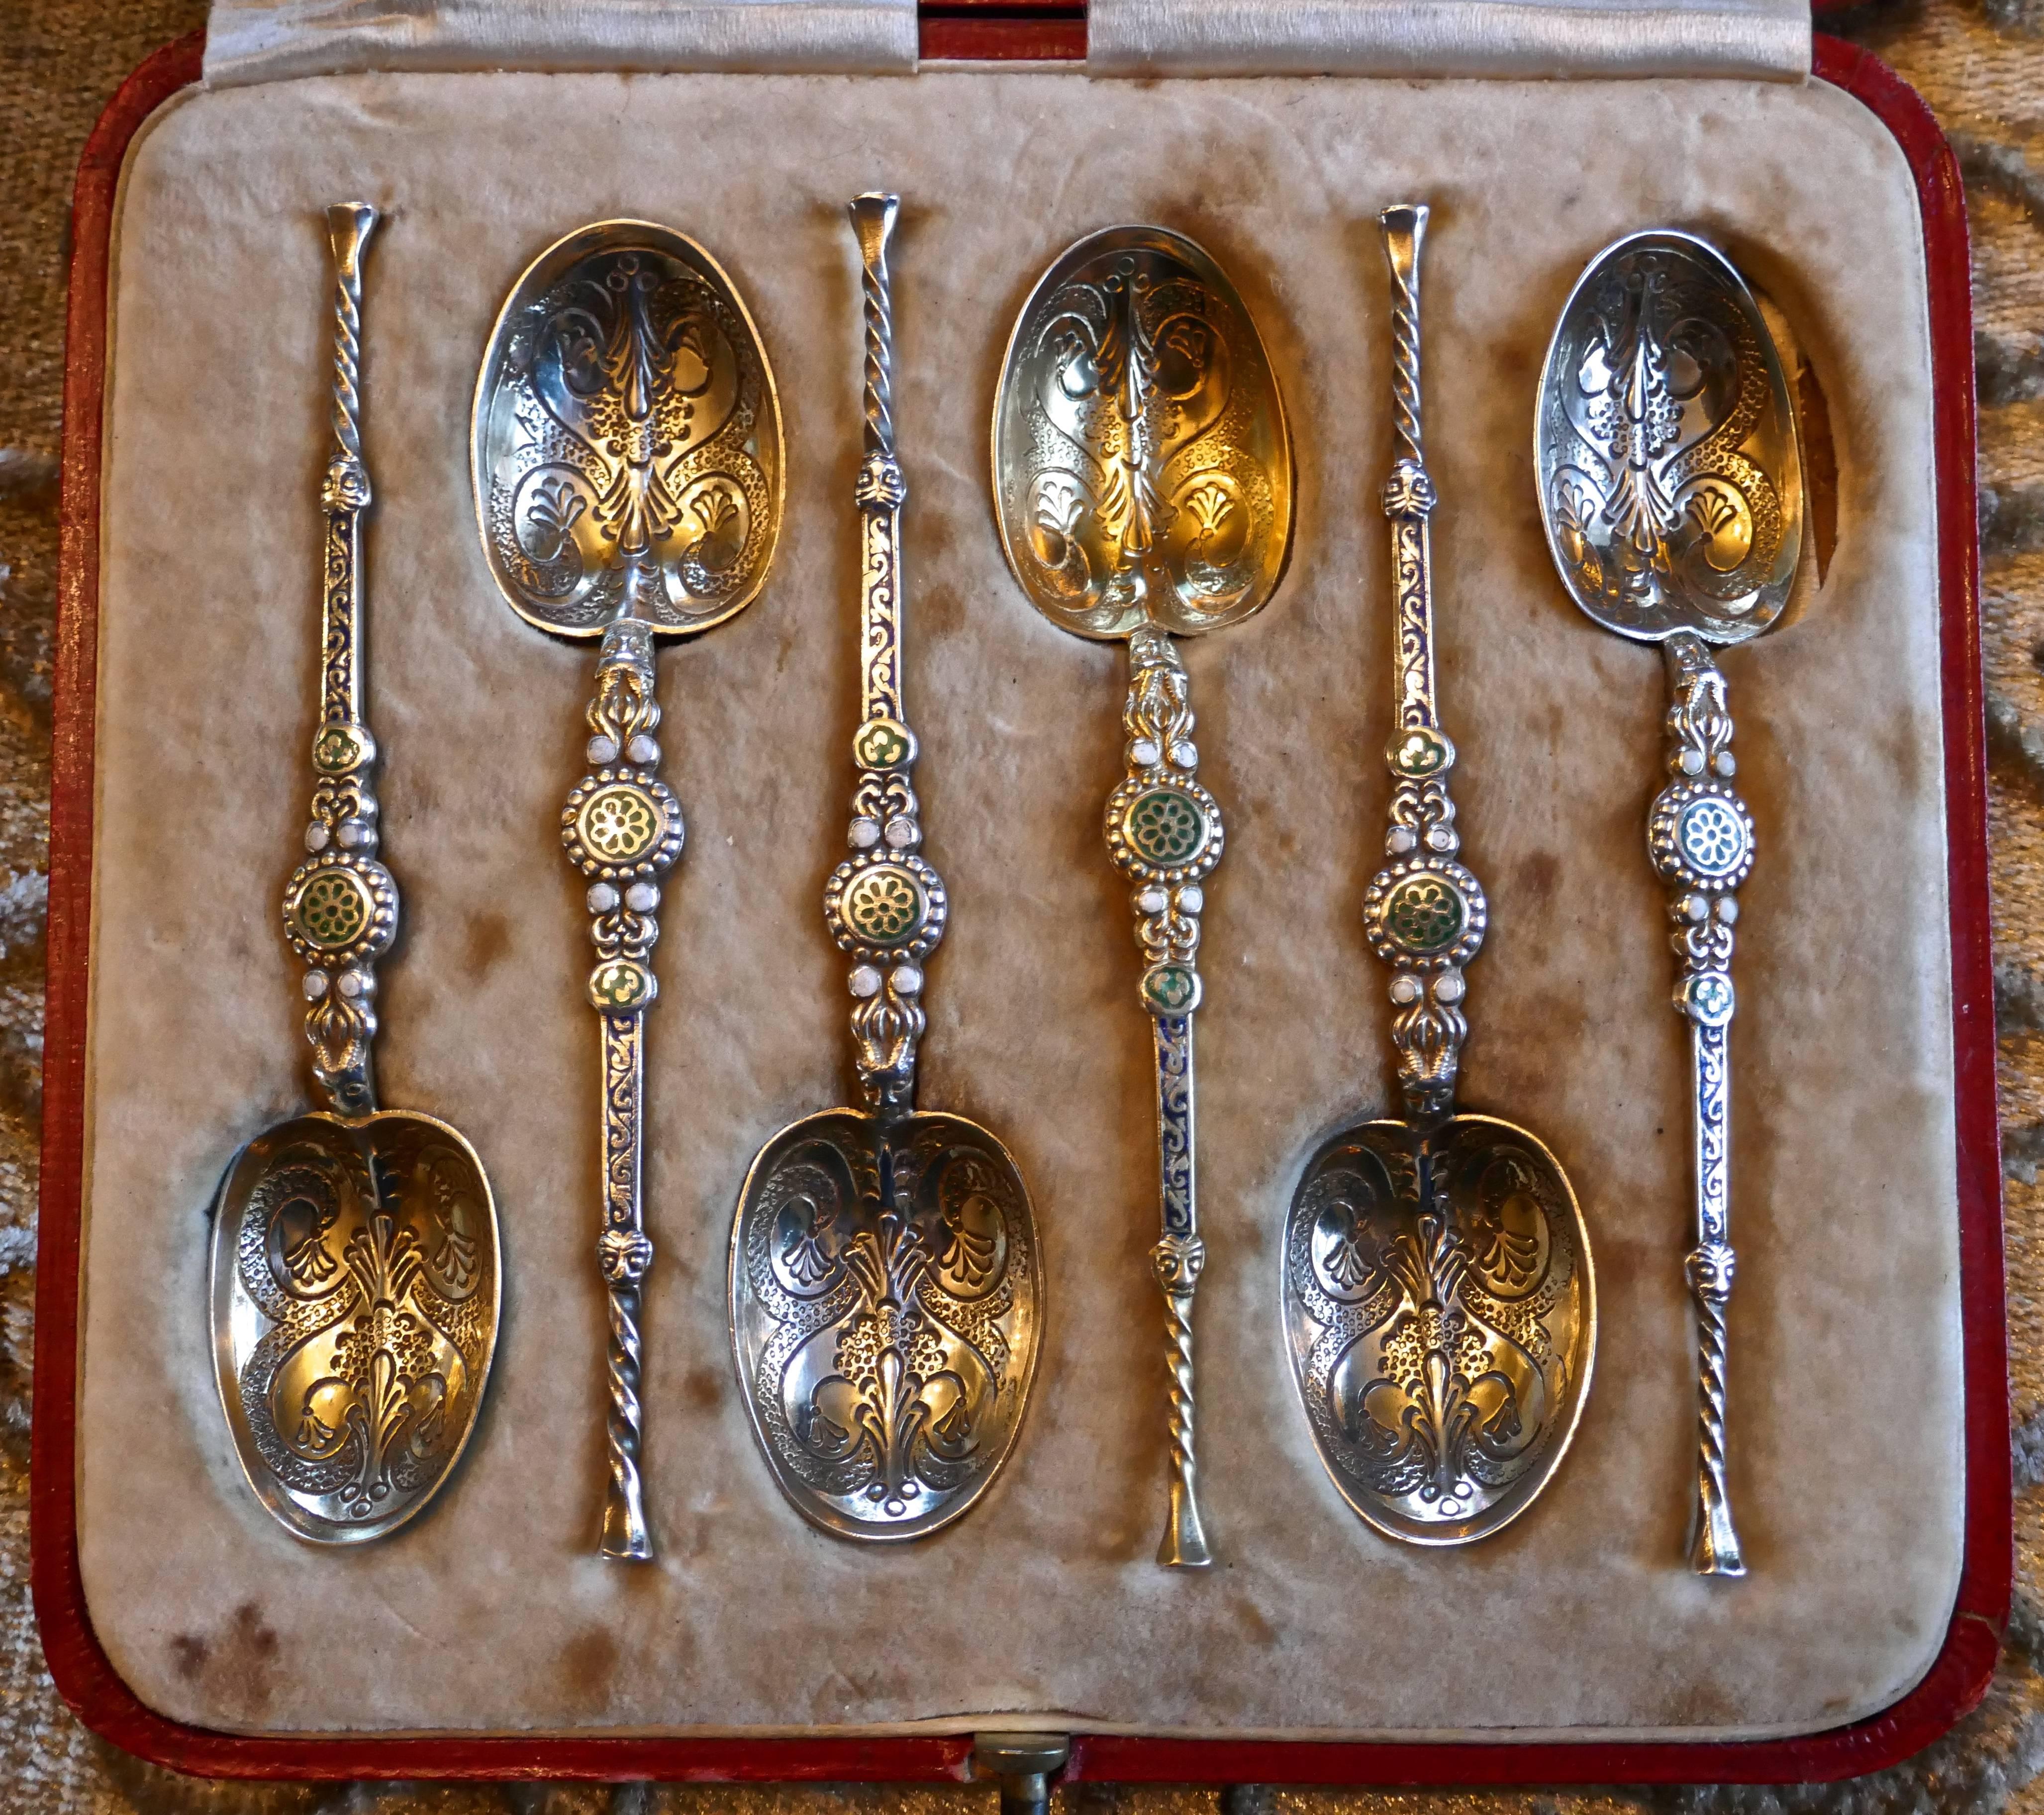 This is a very attractive boxed set of silver and enamel anointing spoons. They are in nice condition for their age, with very fine and decorative detail to the bowls and the handles are very delicately twisted and enamelled with blue, green and